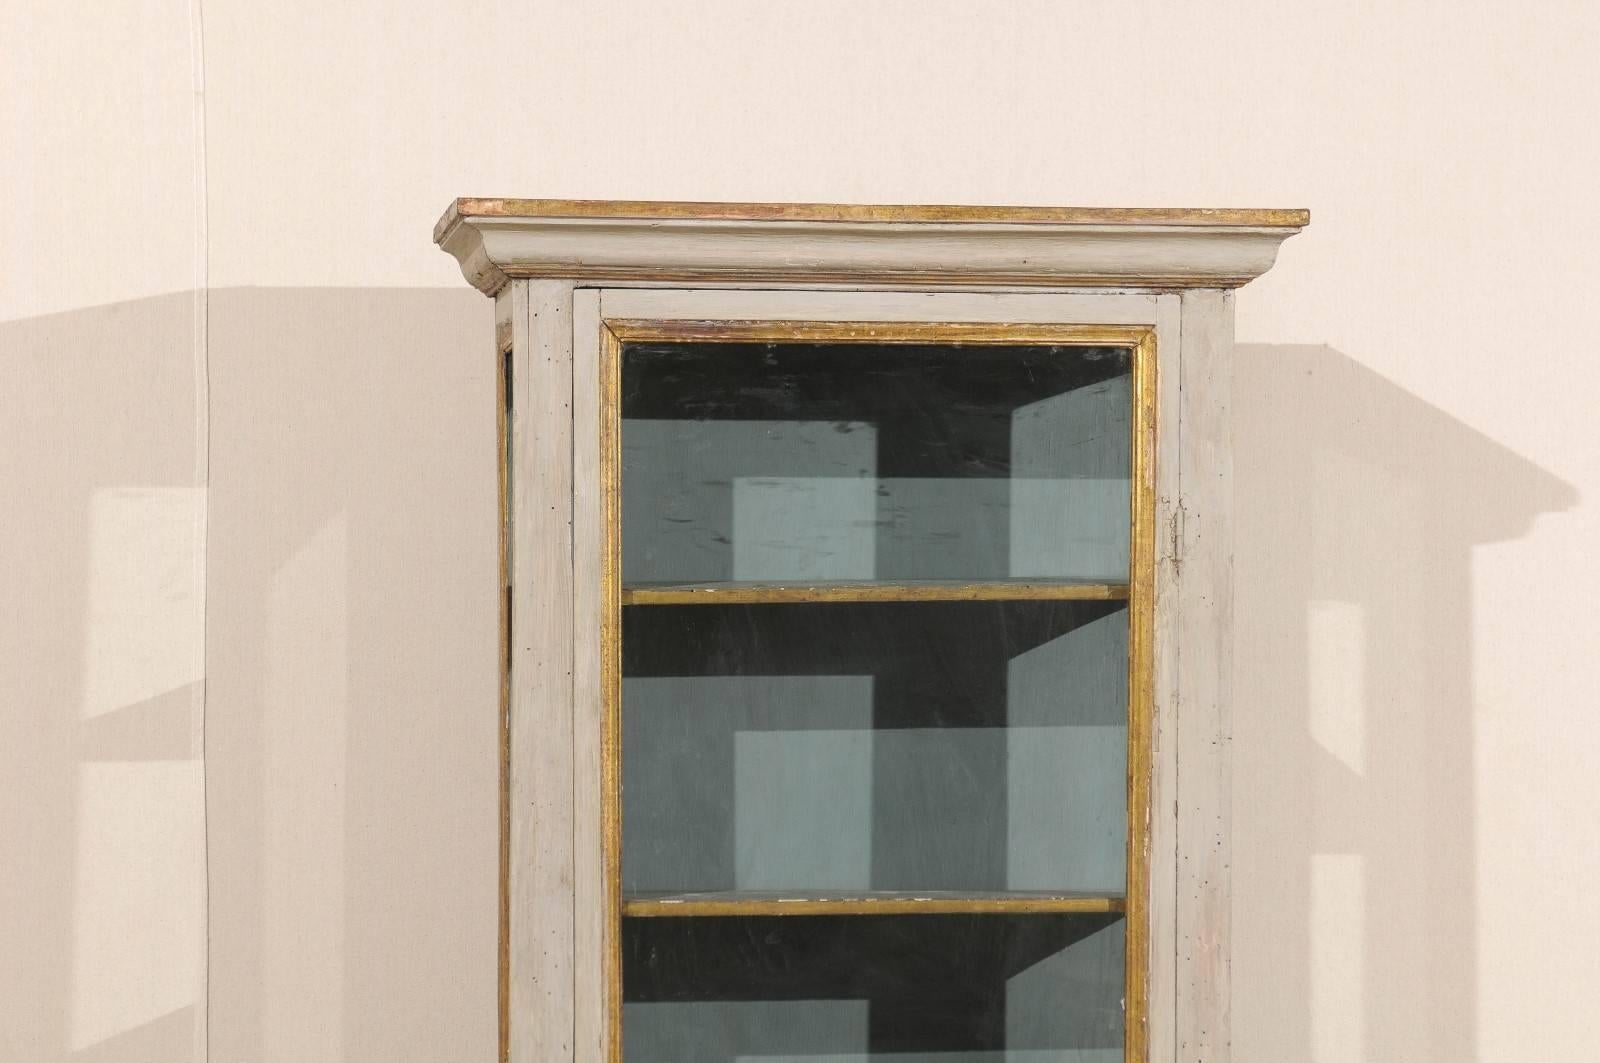 An Italian, early 19th century shallow display cabinet. This lovely one door cabinet features a linear profile with clean lines and is raised on tapered legs. It has its original grey color with gilded accents on the trim and blue painted interior